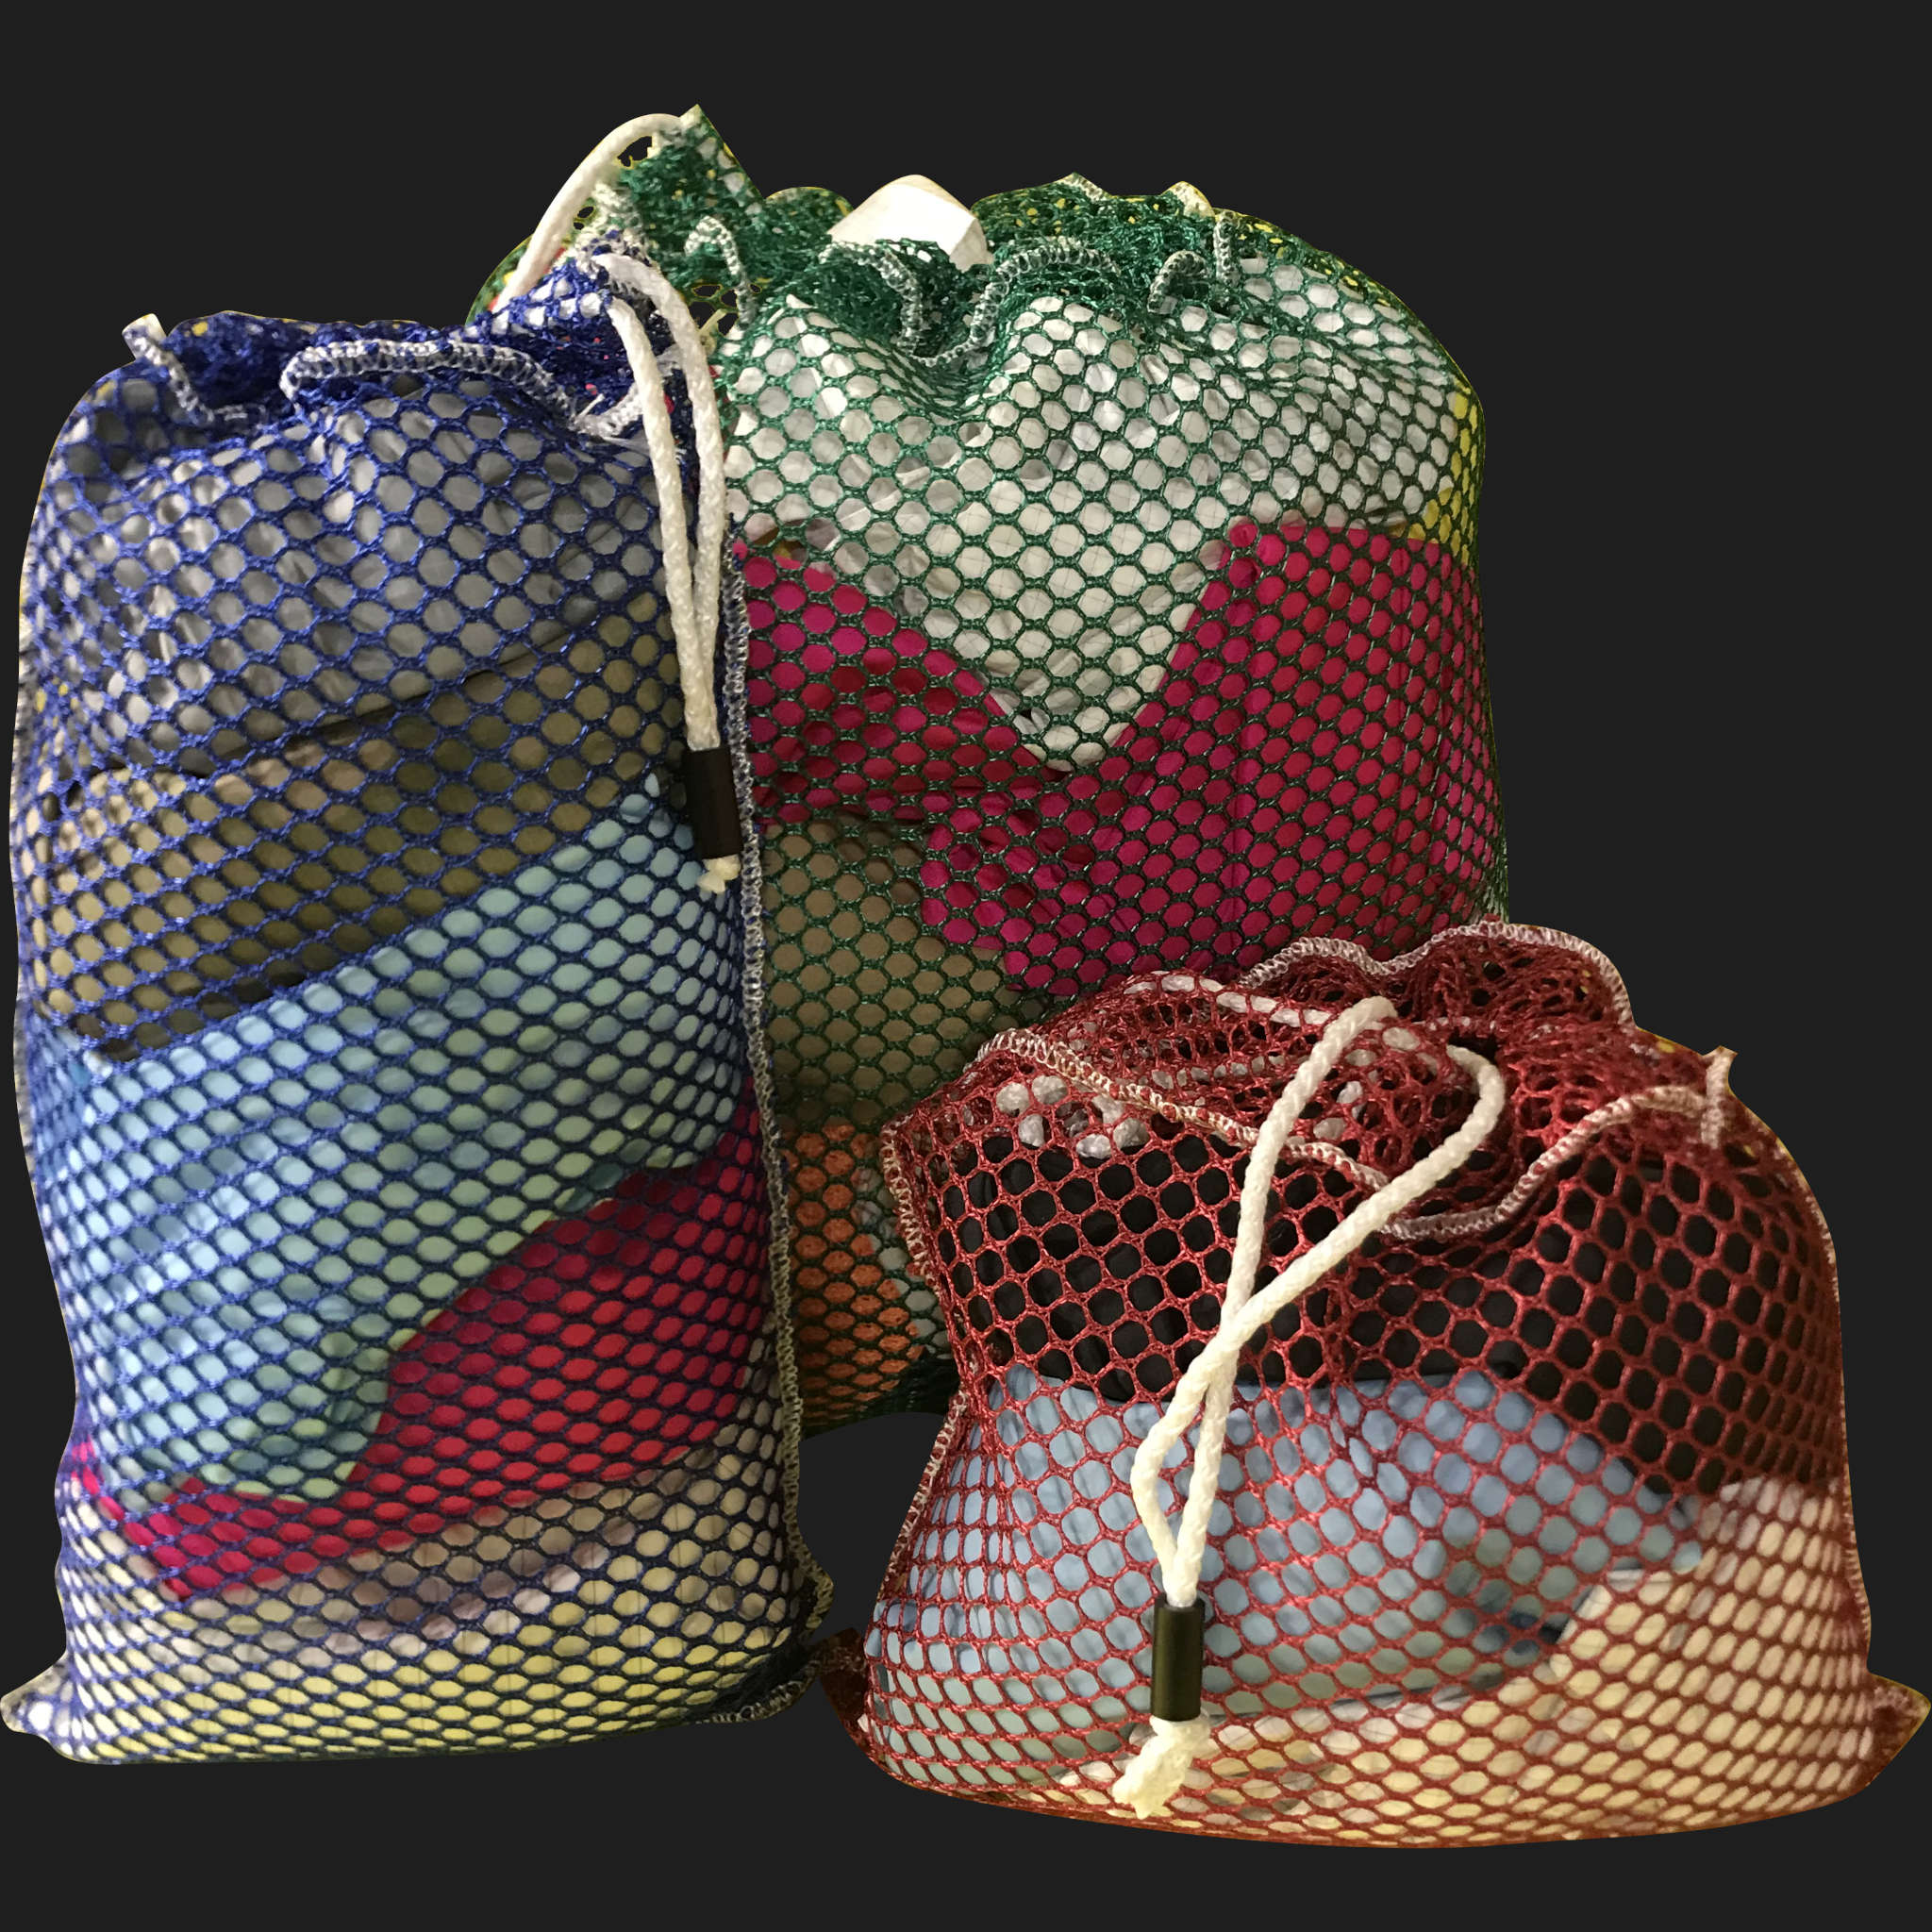 16" x 20" Customized Mesh-Net-Laundry Bags Heavy Duty with Cord and barrellock closure